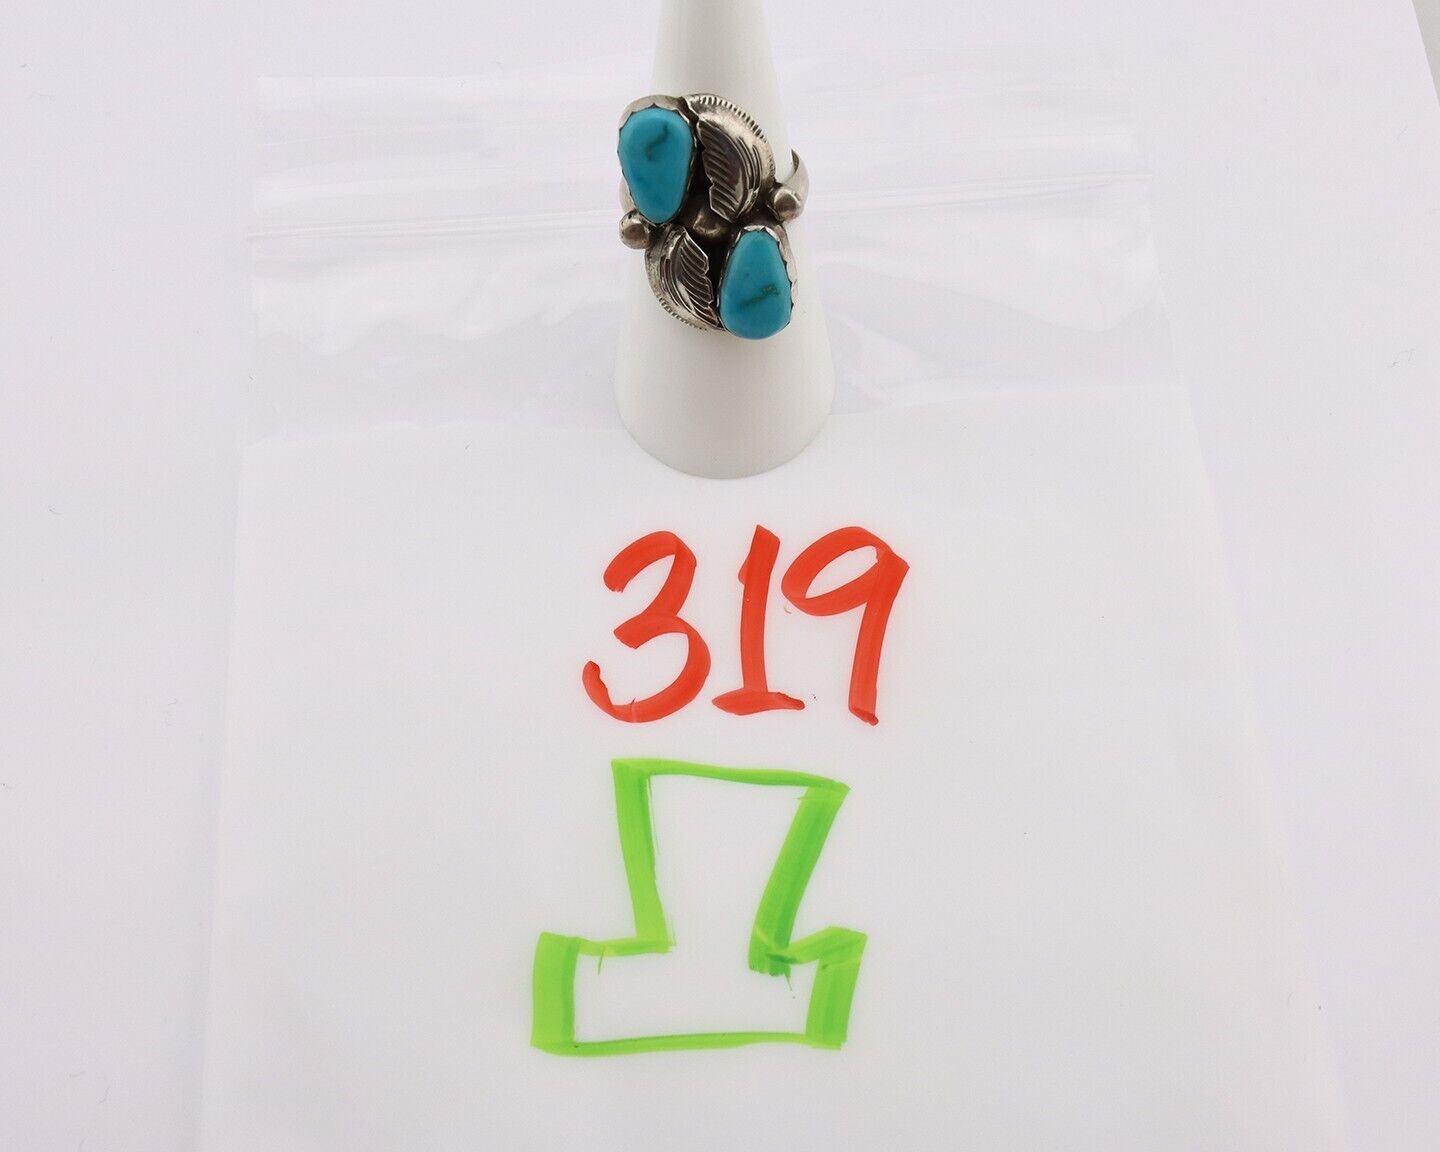 Zuni Ring 925 Silver Natural Blue Turquoise Signed Simplicio C.80's